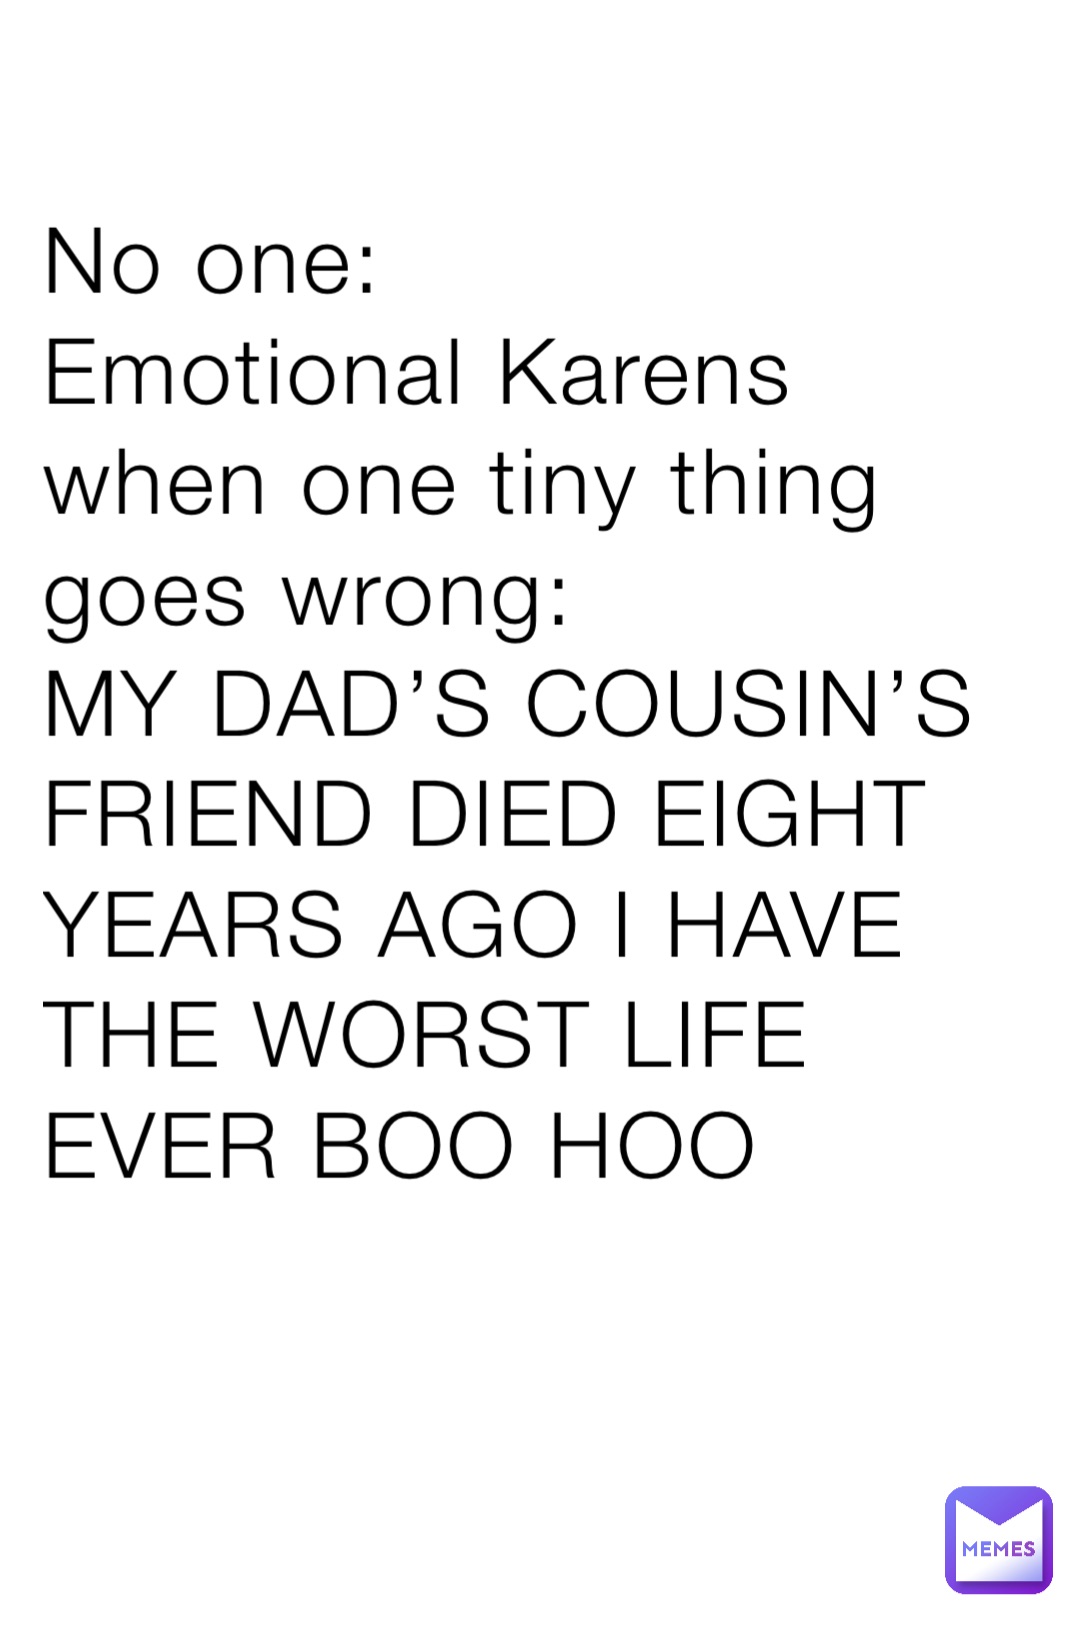 No one:
Emotional Karens when one tiny thing goes wrong:
MY DAD’S COUSIN’S FRIEND DIED EIGHT YEARS AGO I HAVE THE WORST LIFE EVER BOO HOO